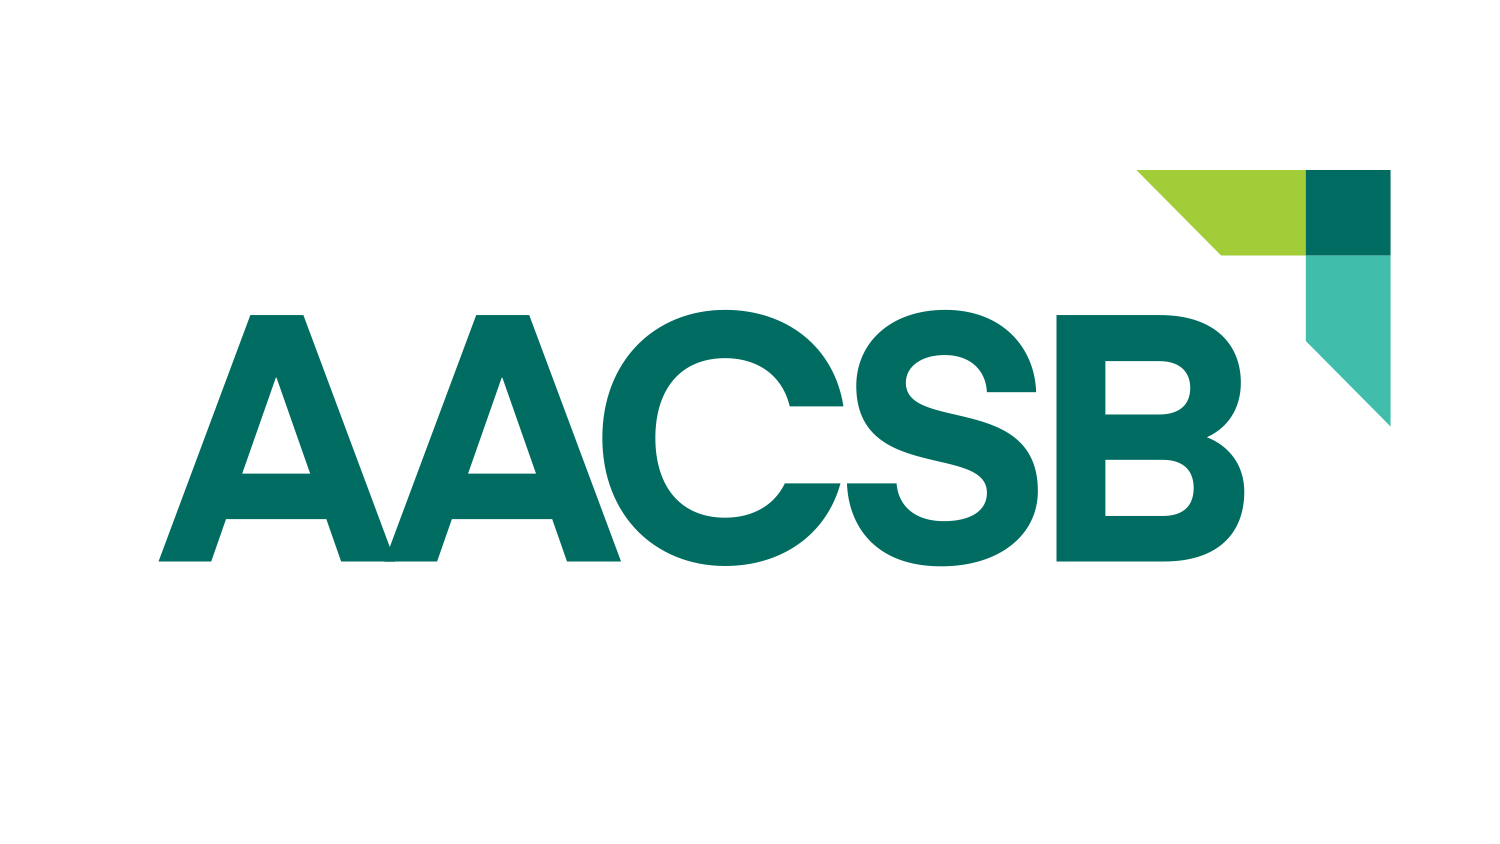 aacsb-corporate-mark-4-hr